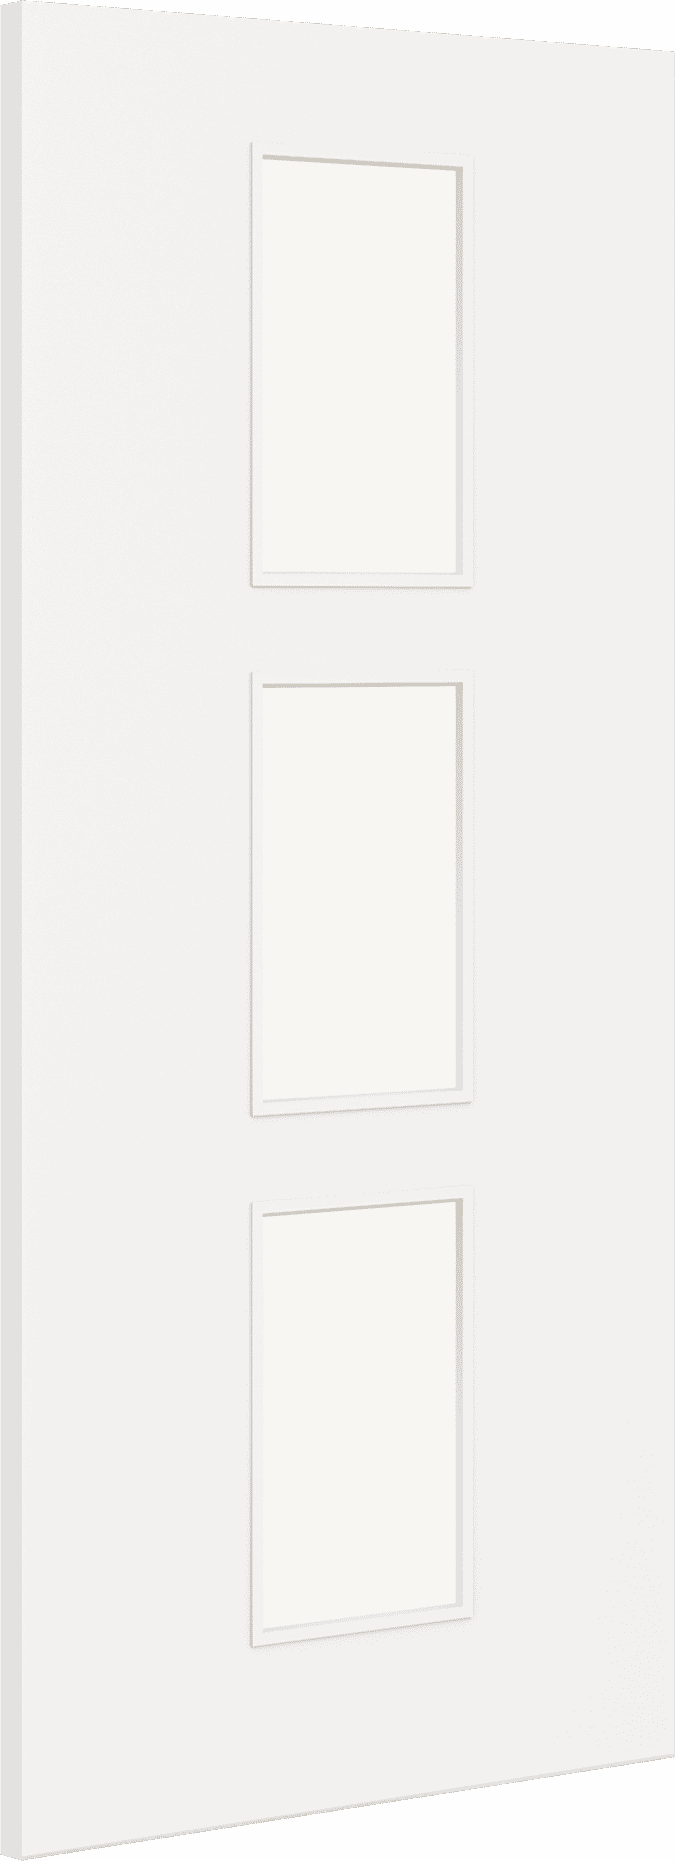 1981mm x 838mm x 44mm (33") Architectural Paint Grade White 11 Frosted Glazed Fire Door Blank